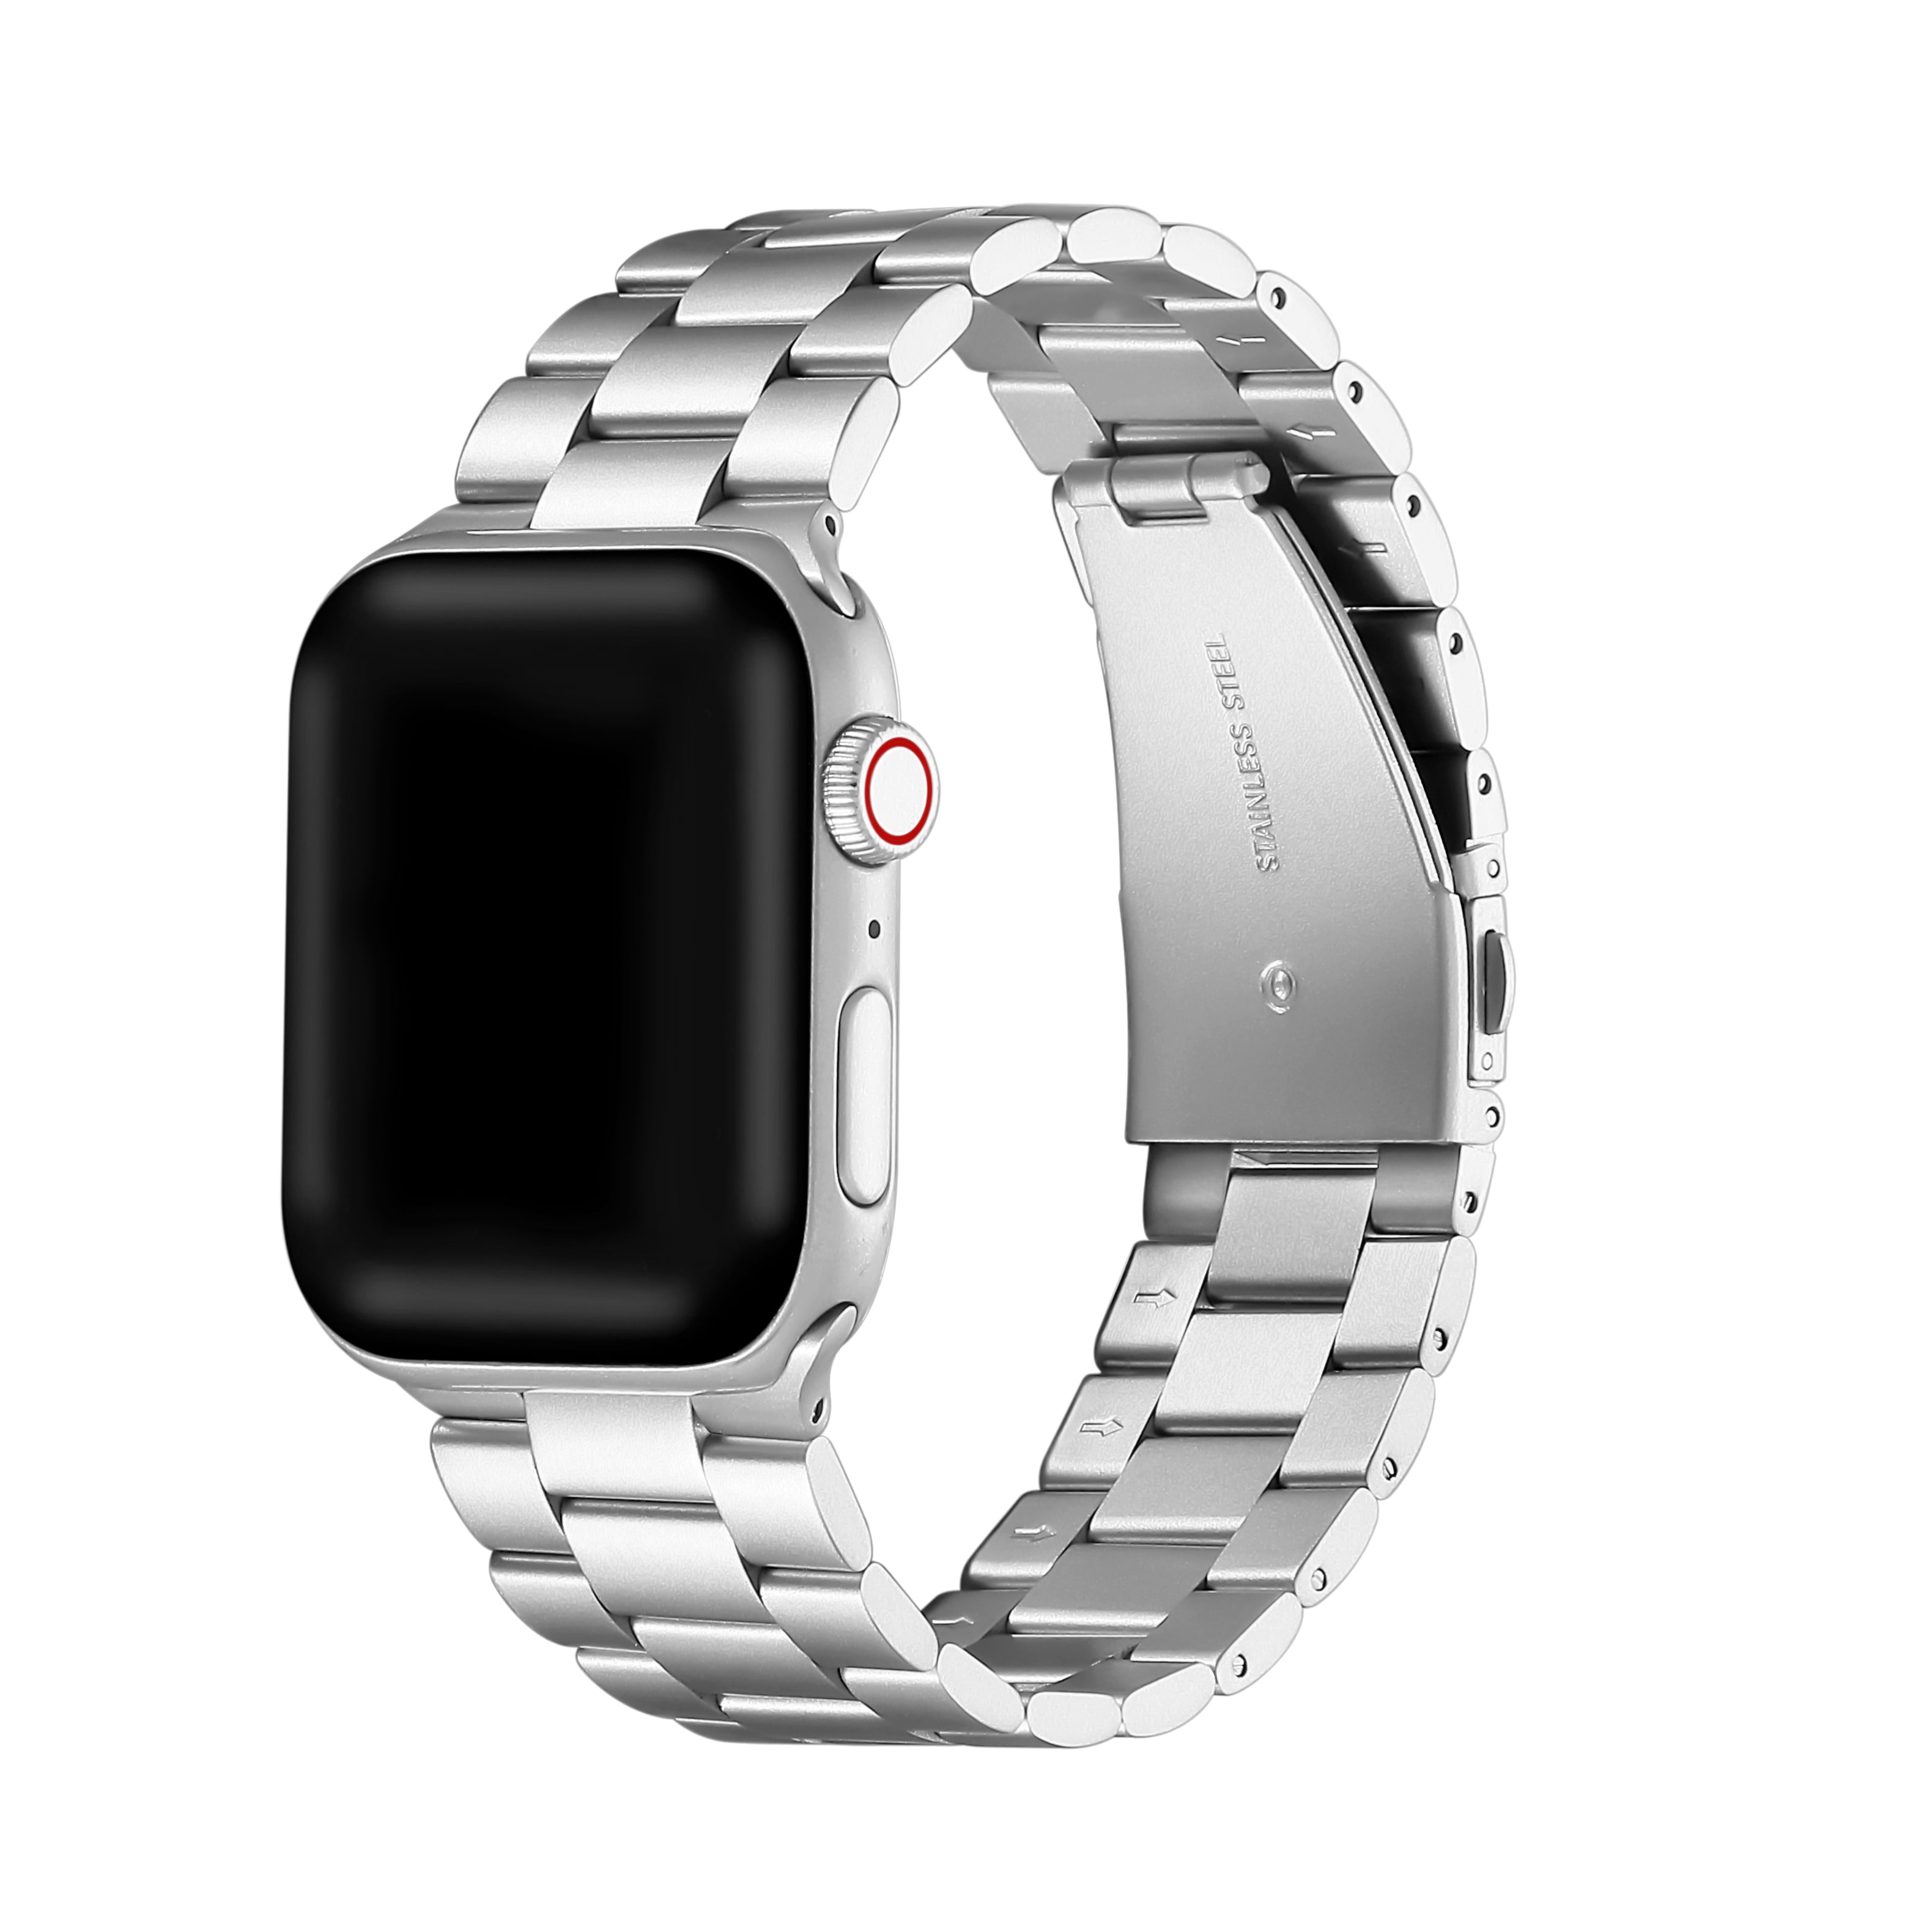 sloan-silver-premium-3-link-stainless-steel-band-for-apple-watch-series